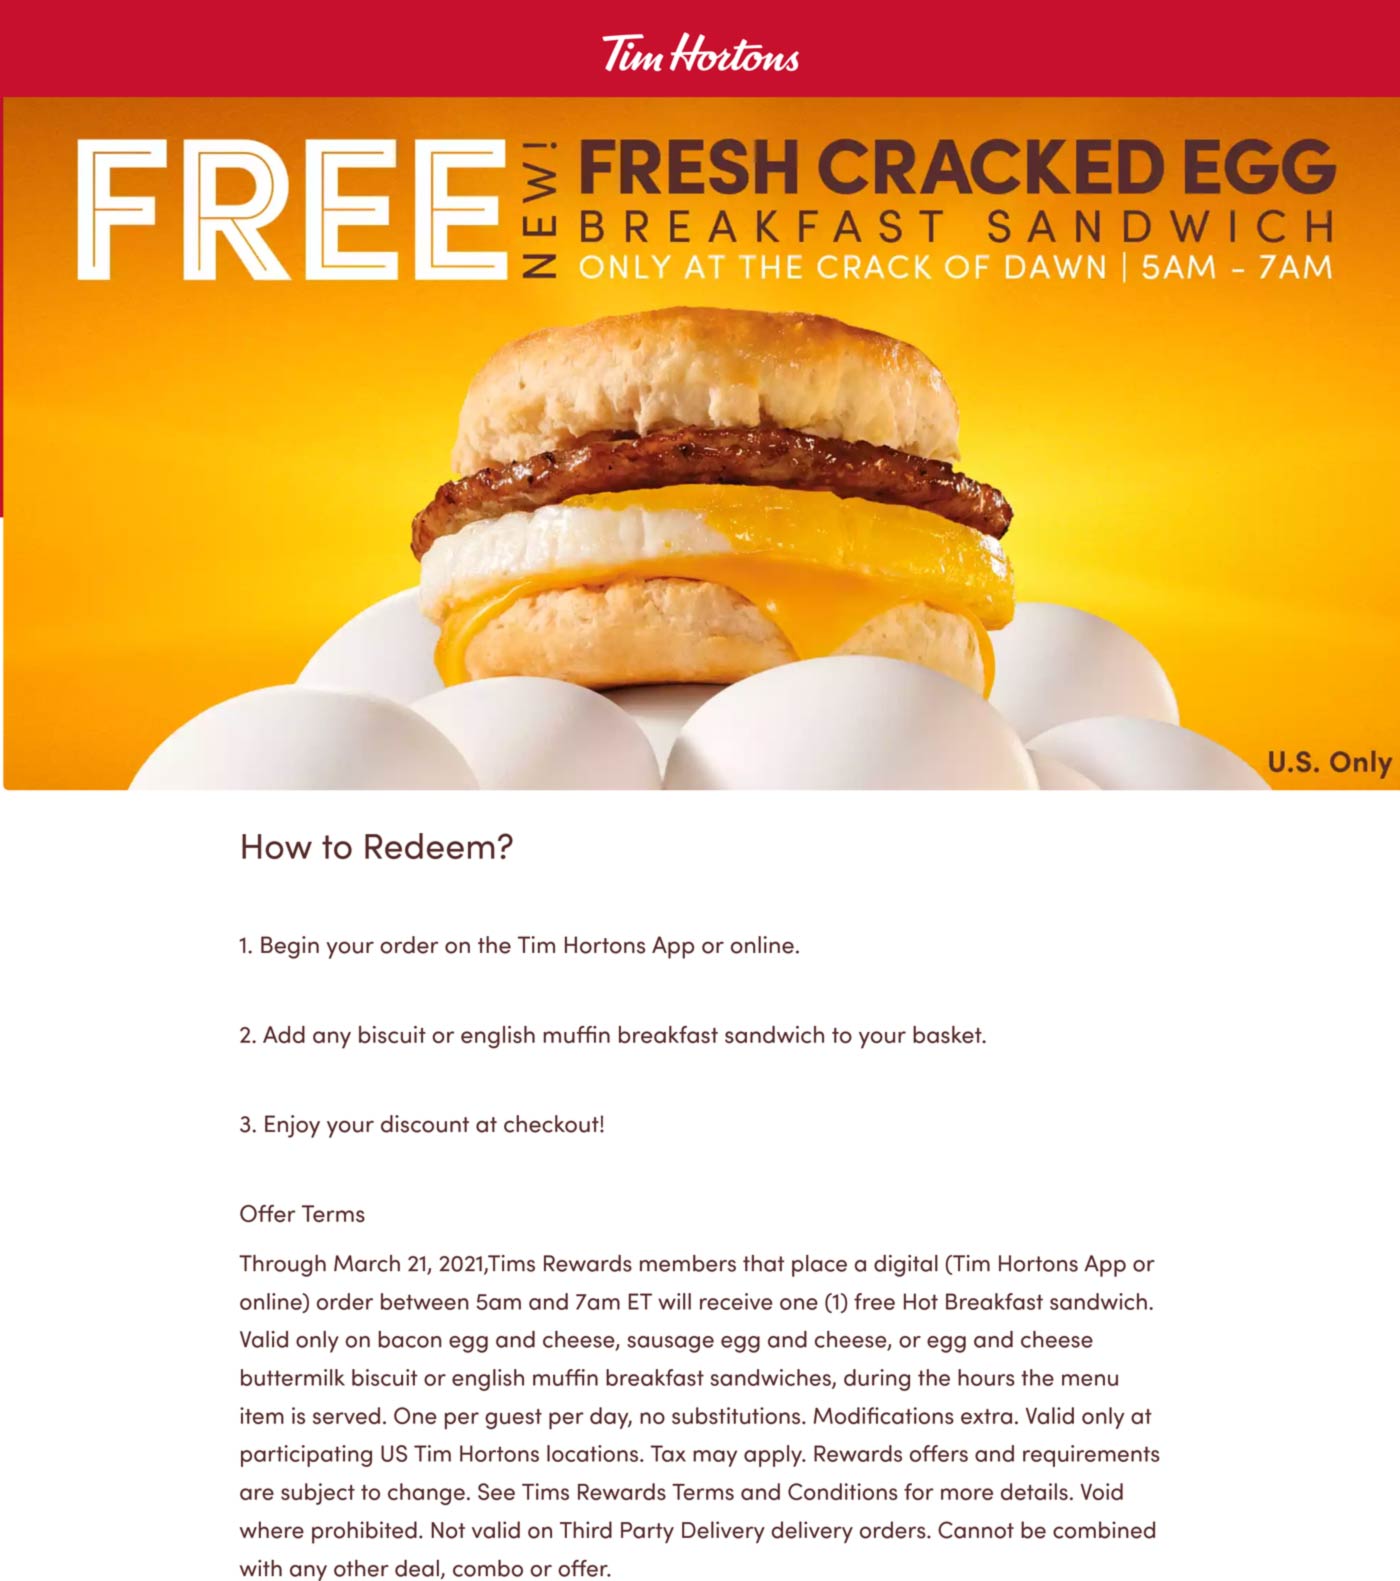 Tim Hortons restaurants Coupon  Free egg breakfast sandwich 5-7a daily at Tim Hortons #timhortons 